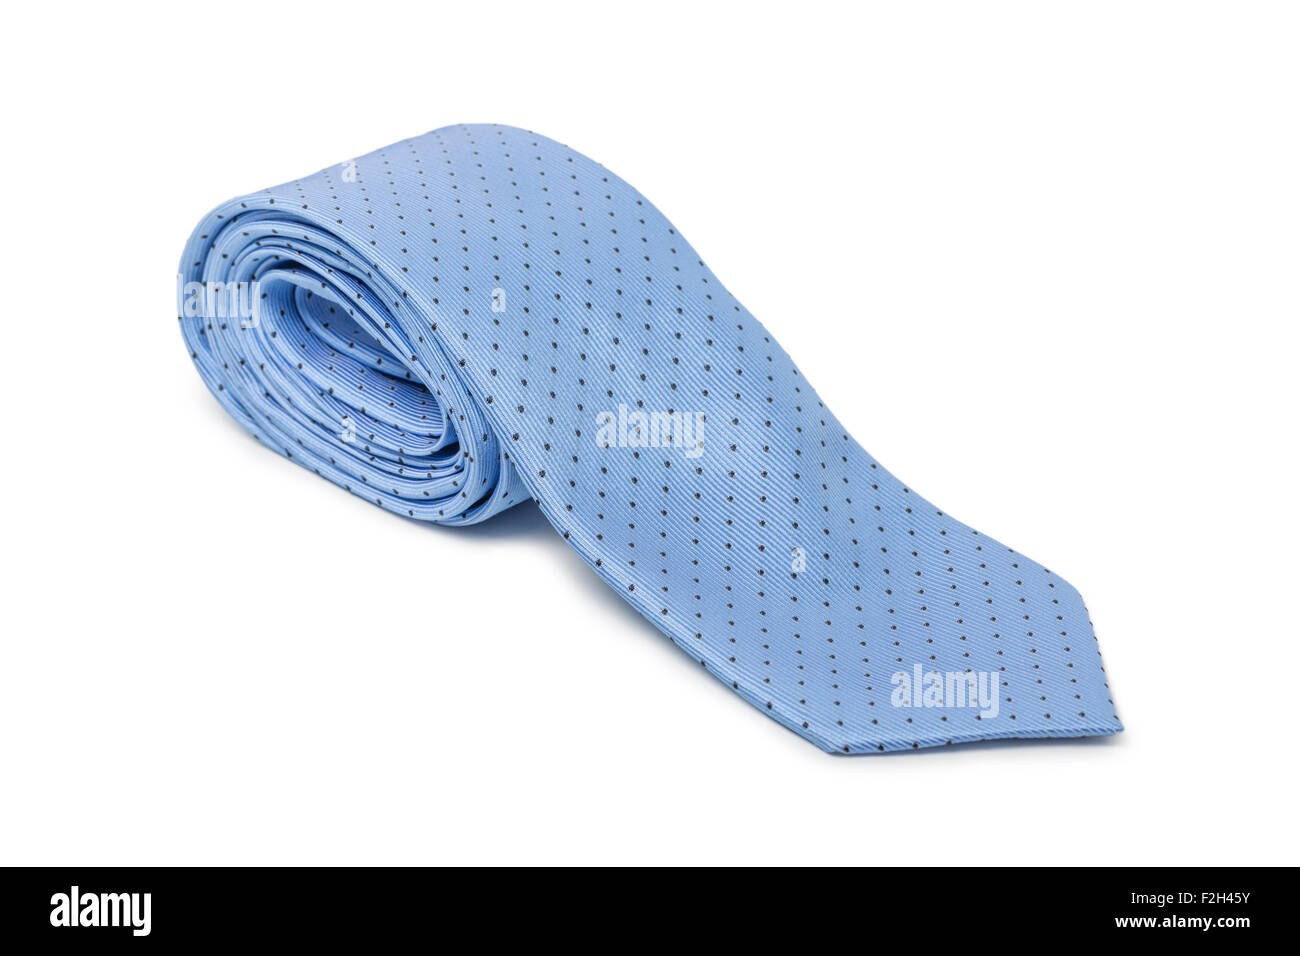 Blue rolled up tie isolated on white background Stock Photo